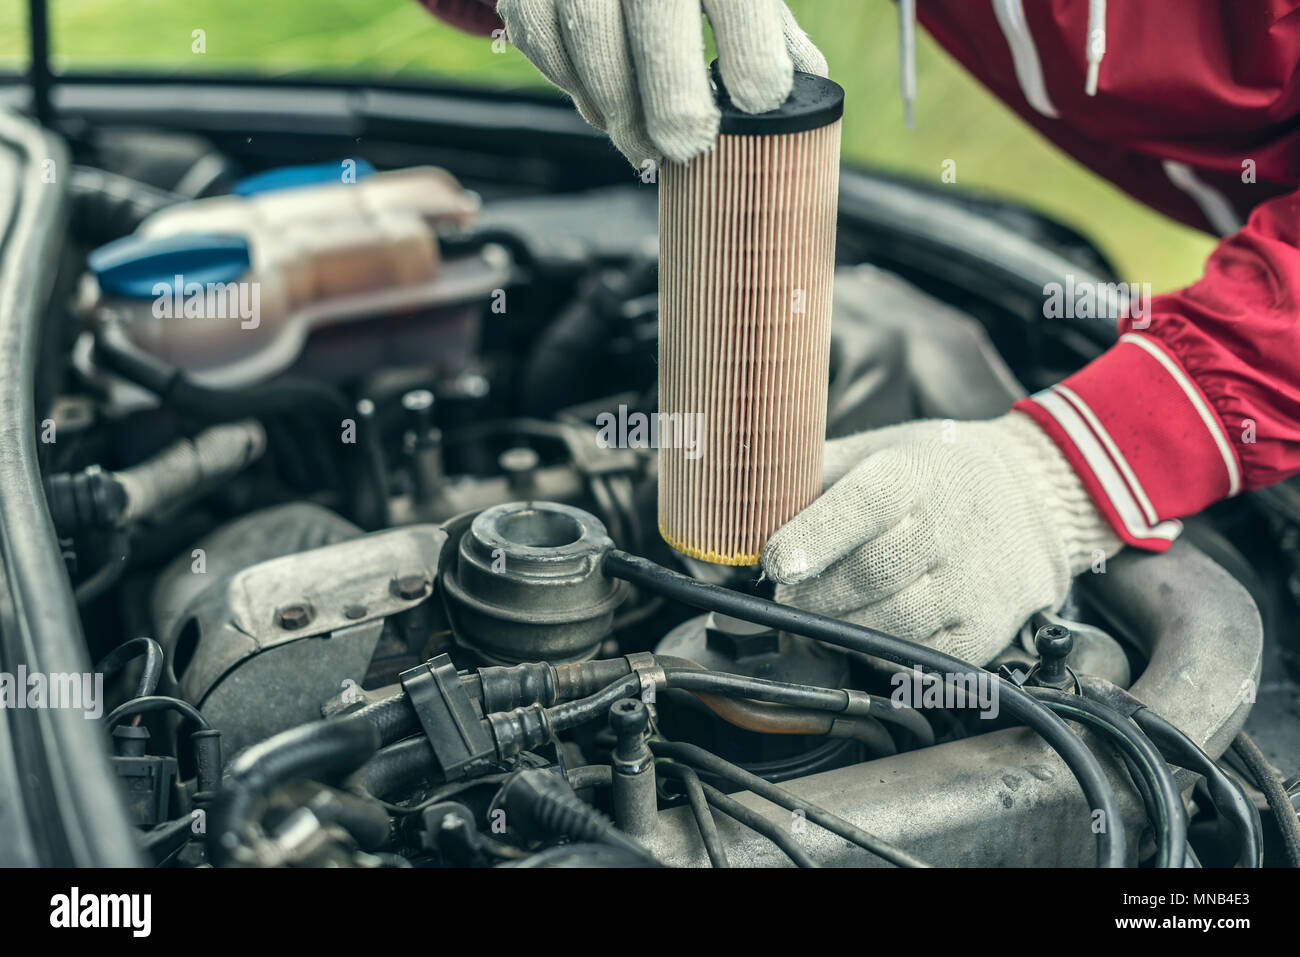 The auto mechanic replaces the car's oil filter. Stock Photo